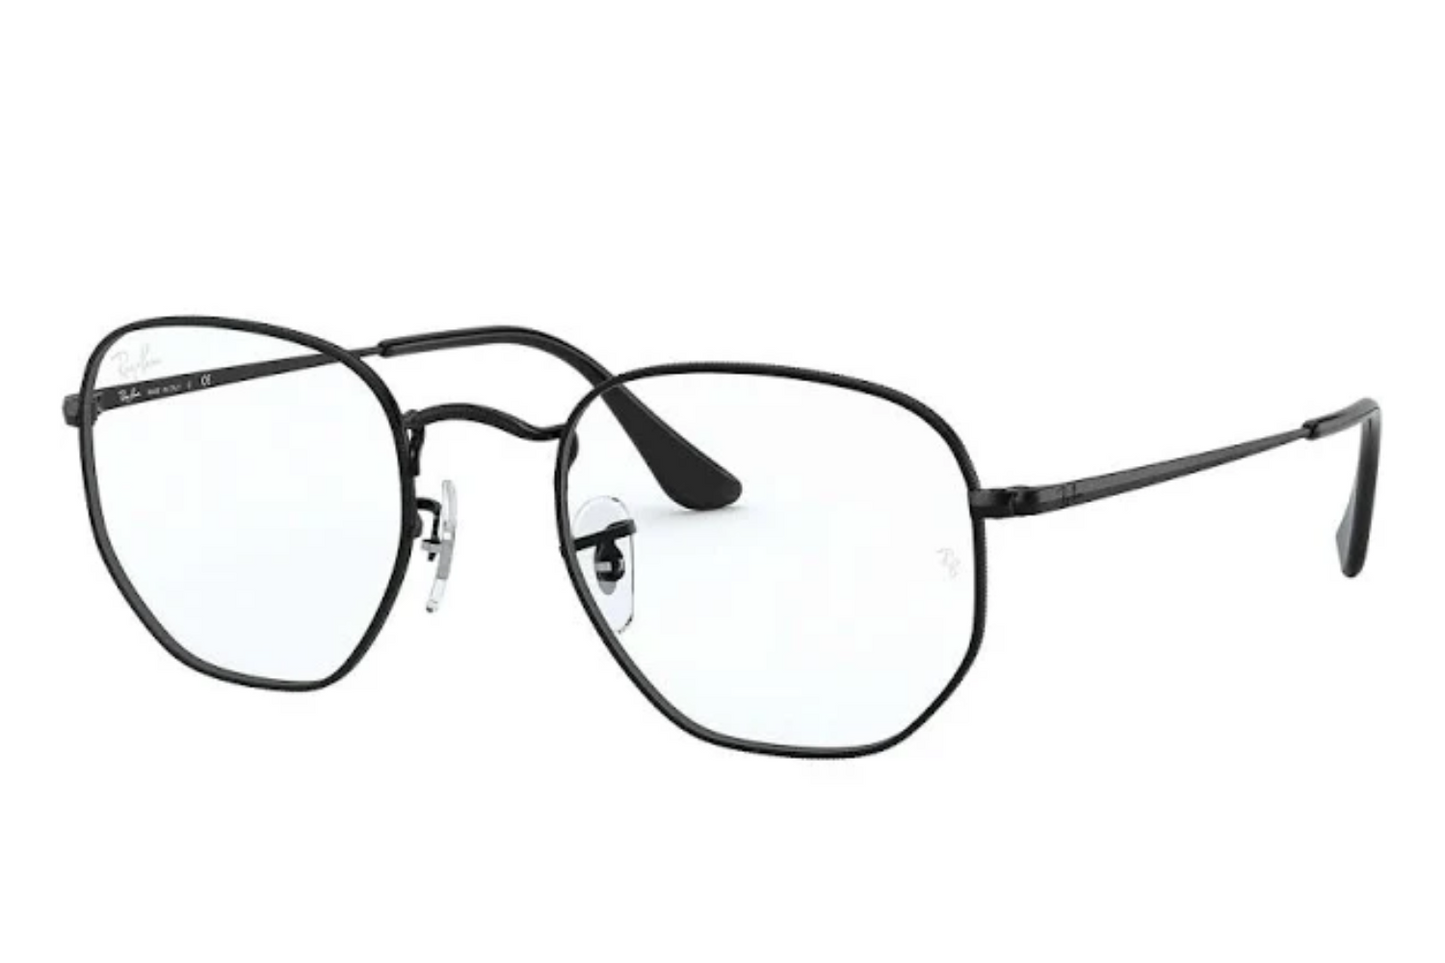 Ray-Ban Frame RX6448